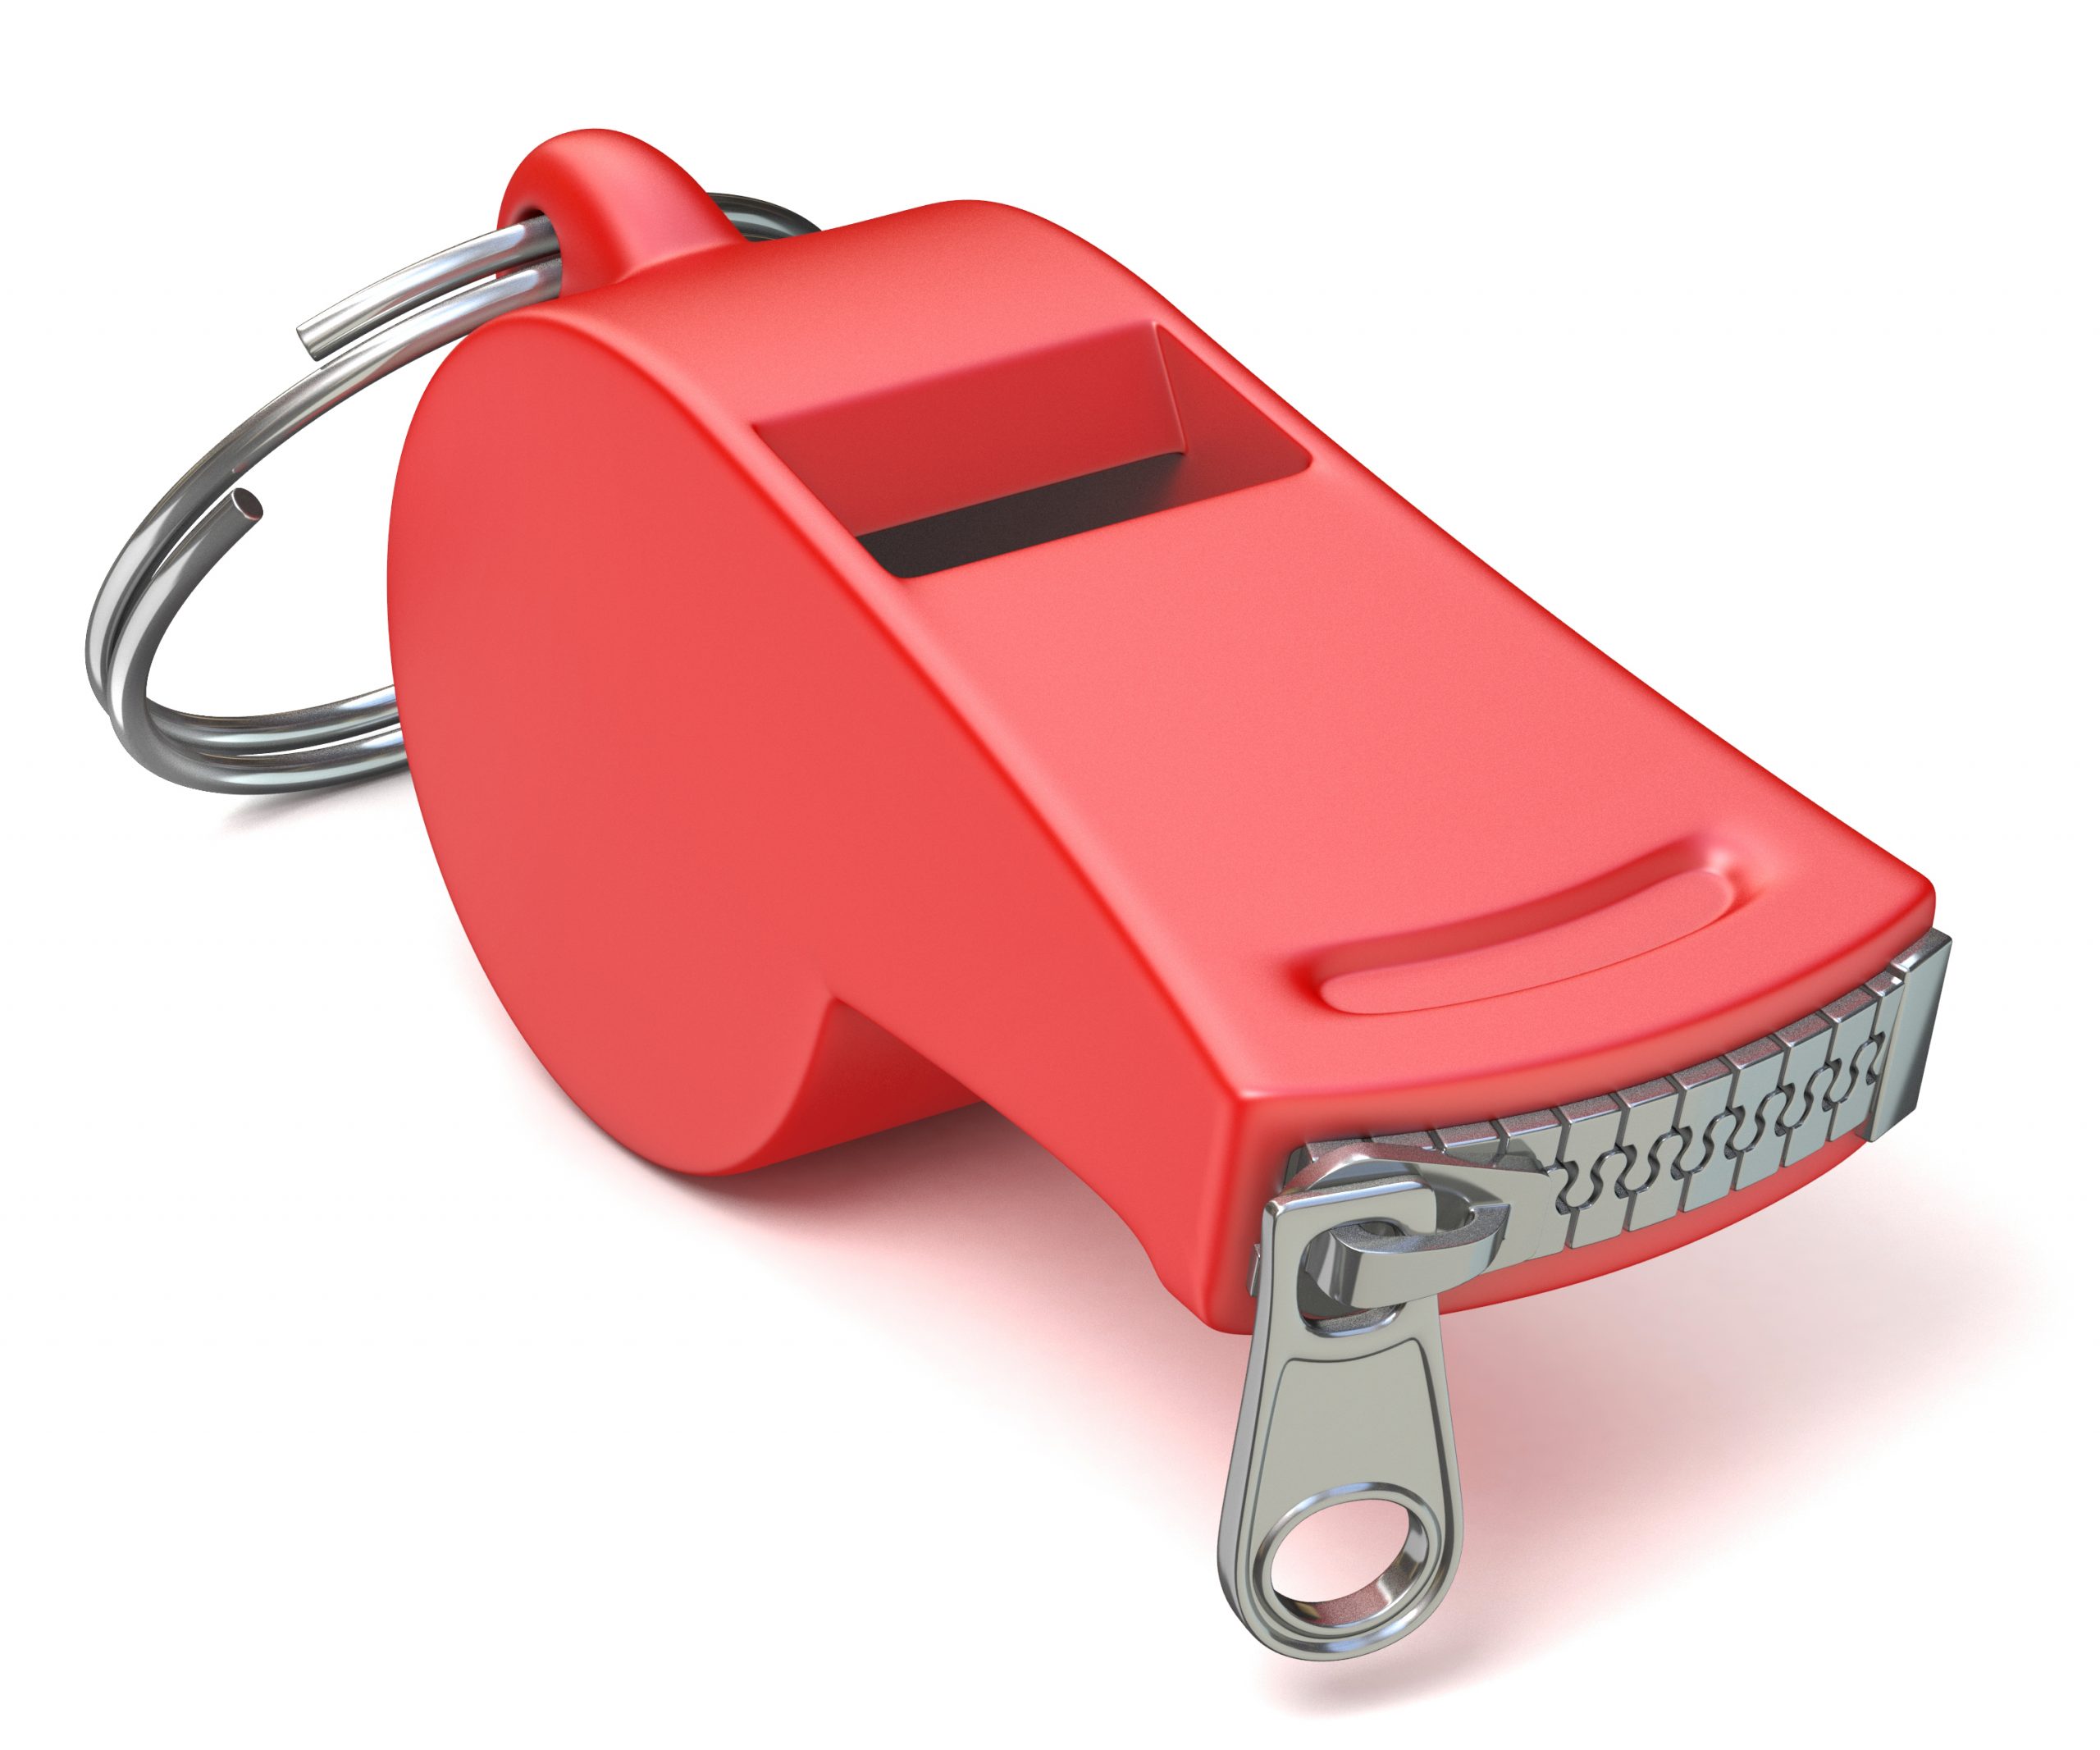 trade secret - https://depositphotos.com/107462850/stock-photo-red-whistle-with-a-closed.html